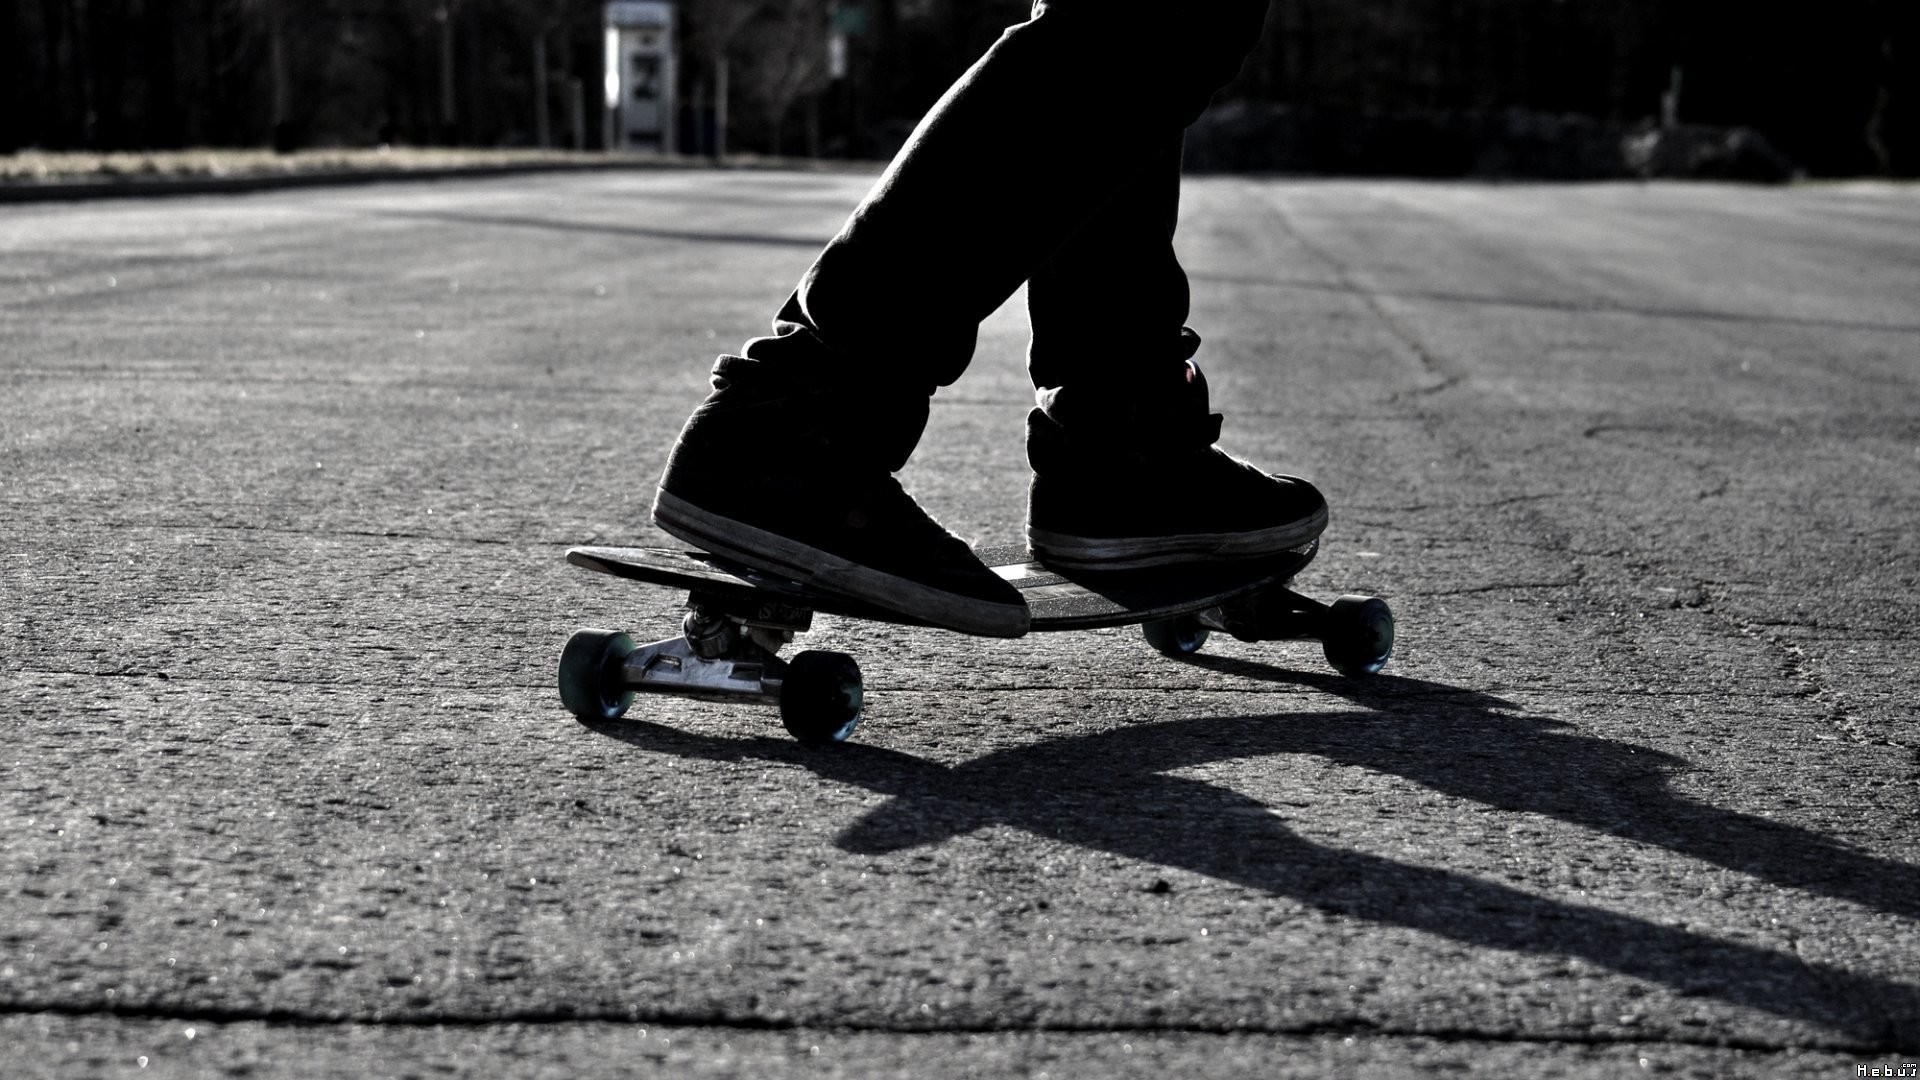 1920x1080 Black And White Skateboarding Monochrome Skates Wallpaper Background And  Decker And Decker Parts And Mild